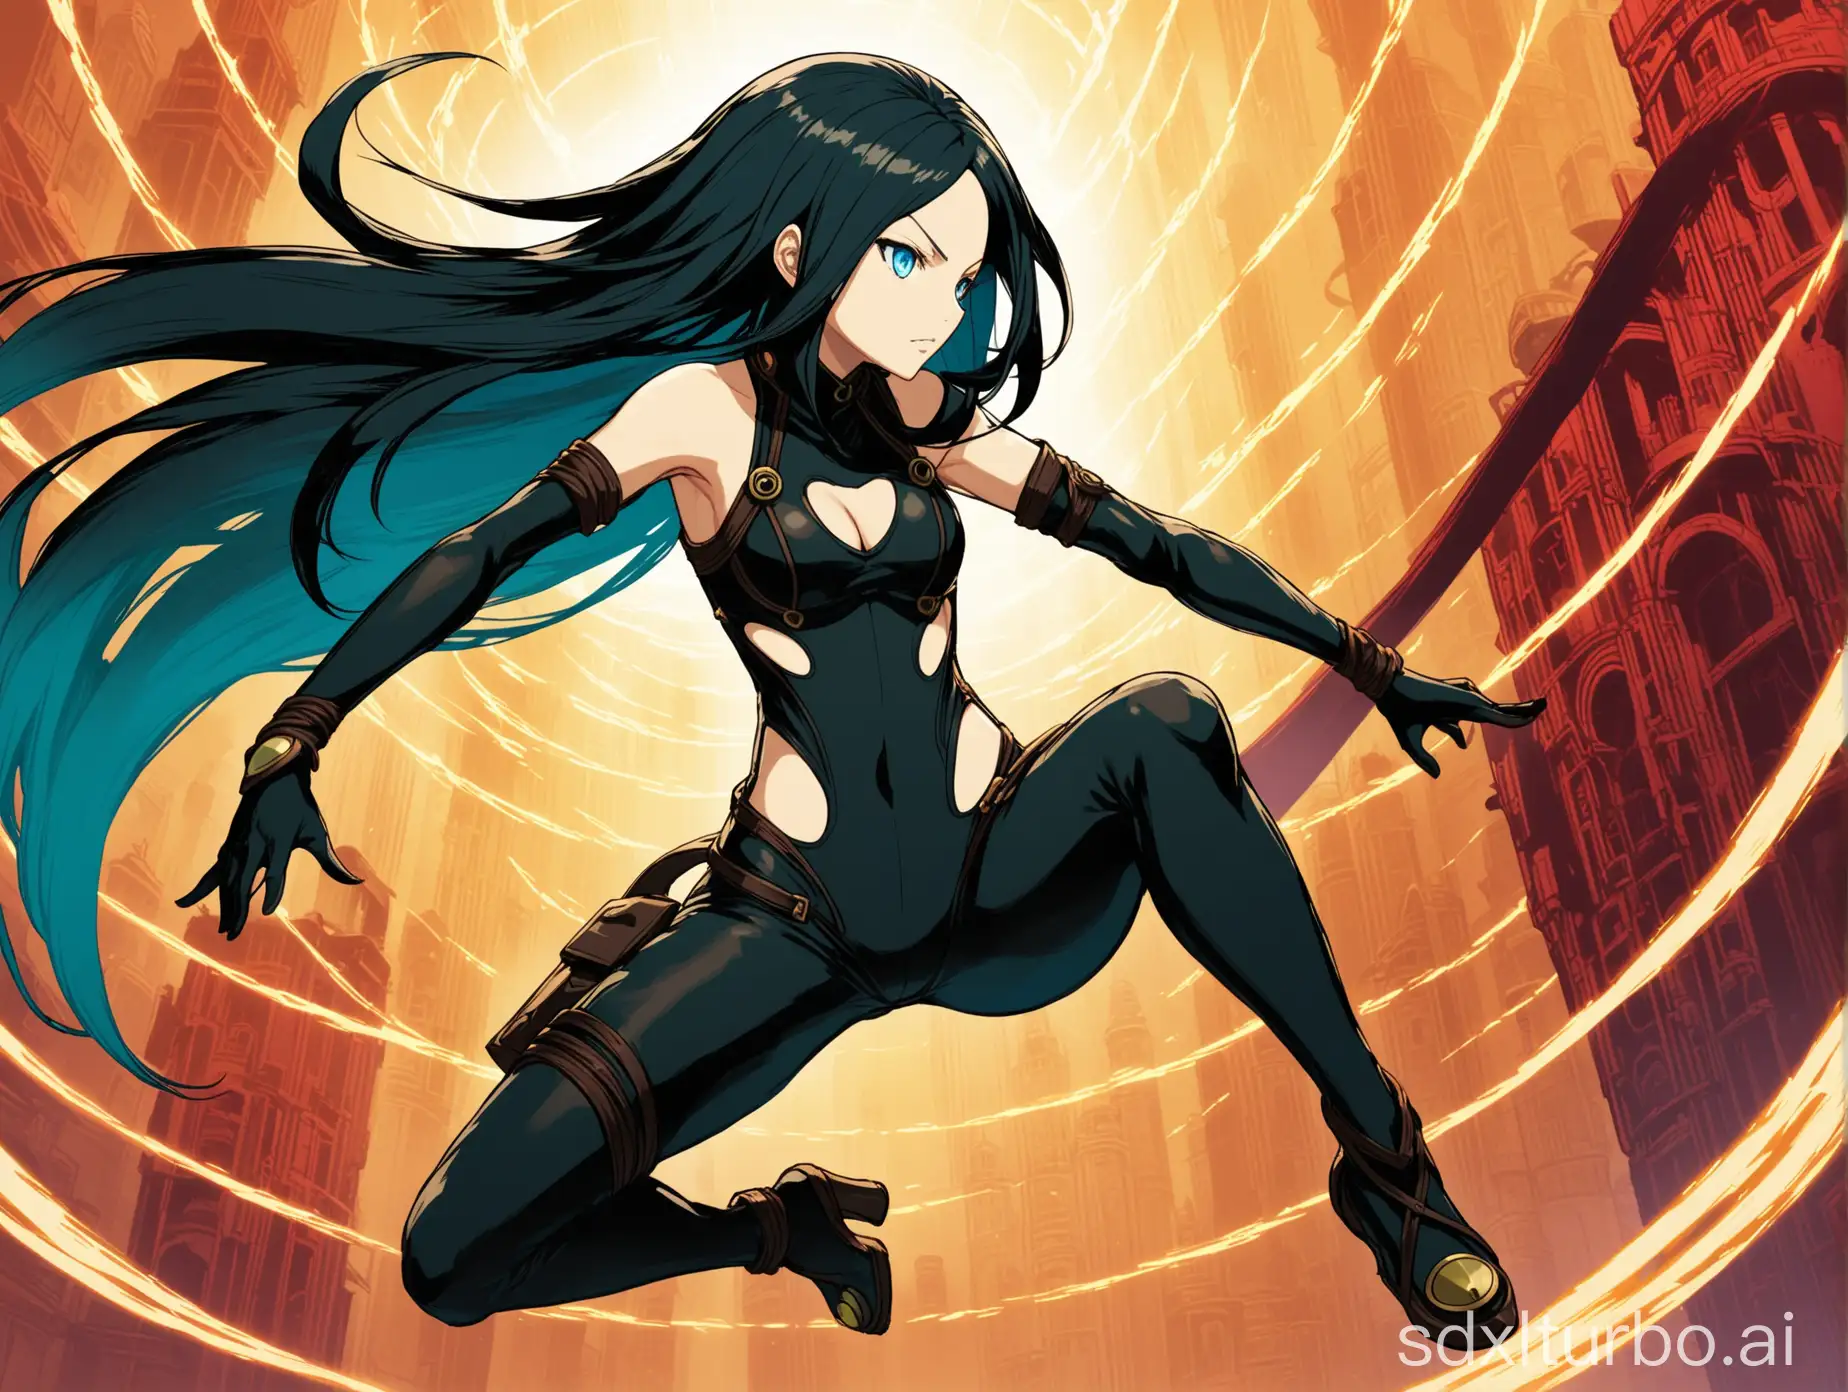 raven from gravity rush 2 ark of time, black long hair with red strands, blue eyes, cat suit with cut-outs, in action pose